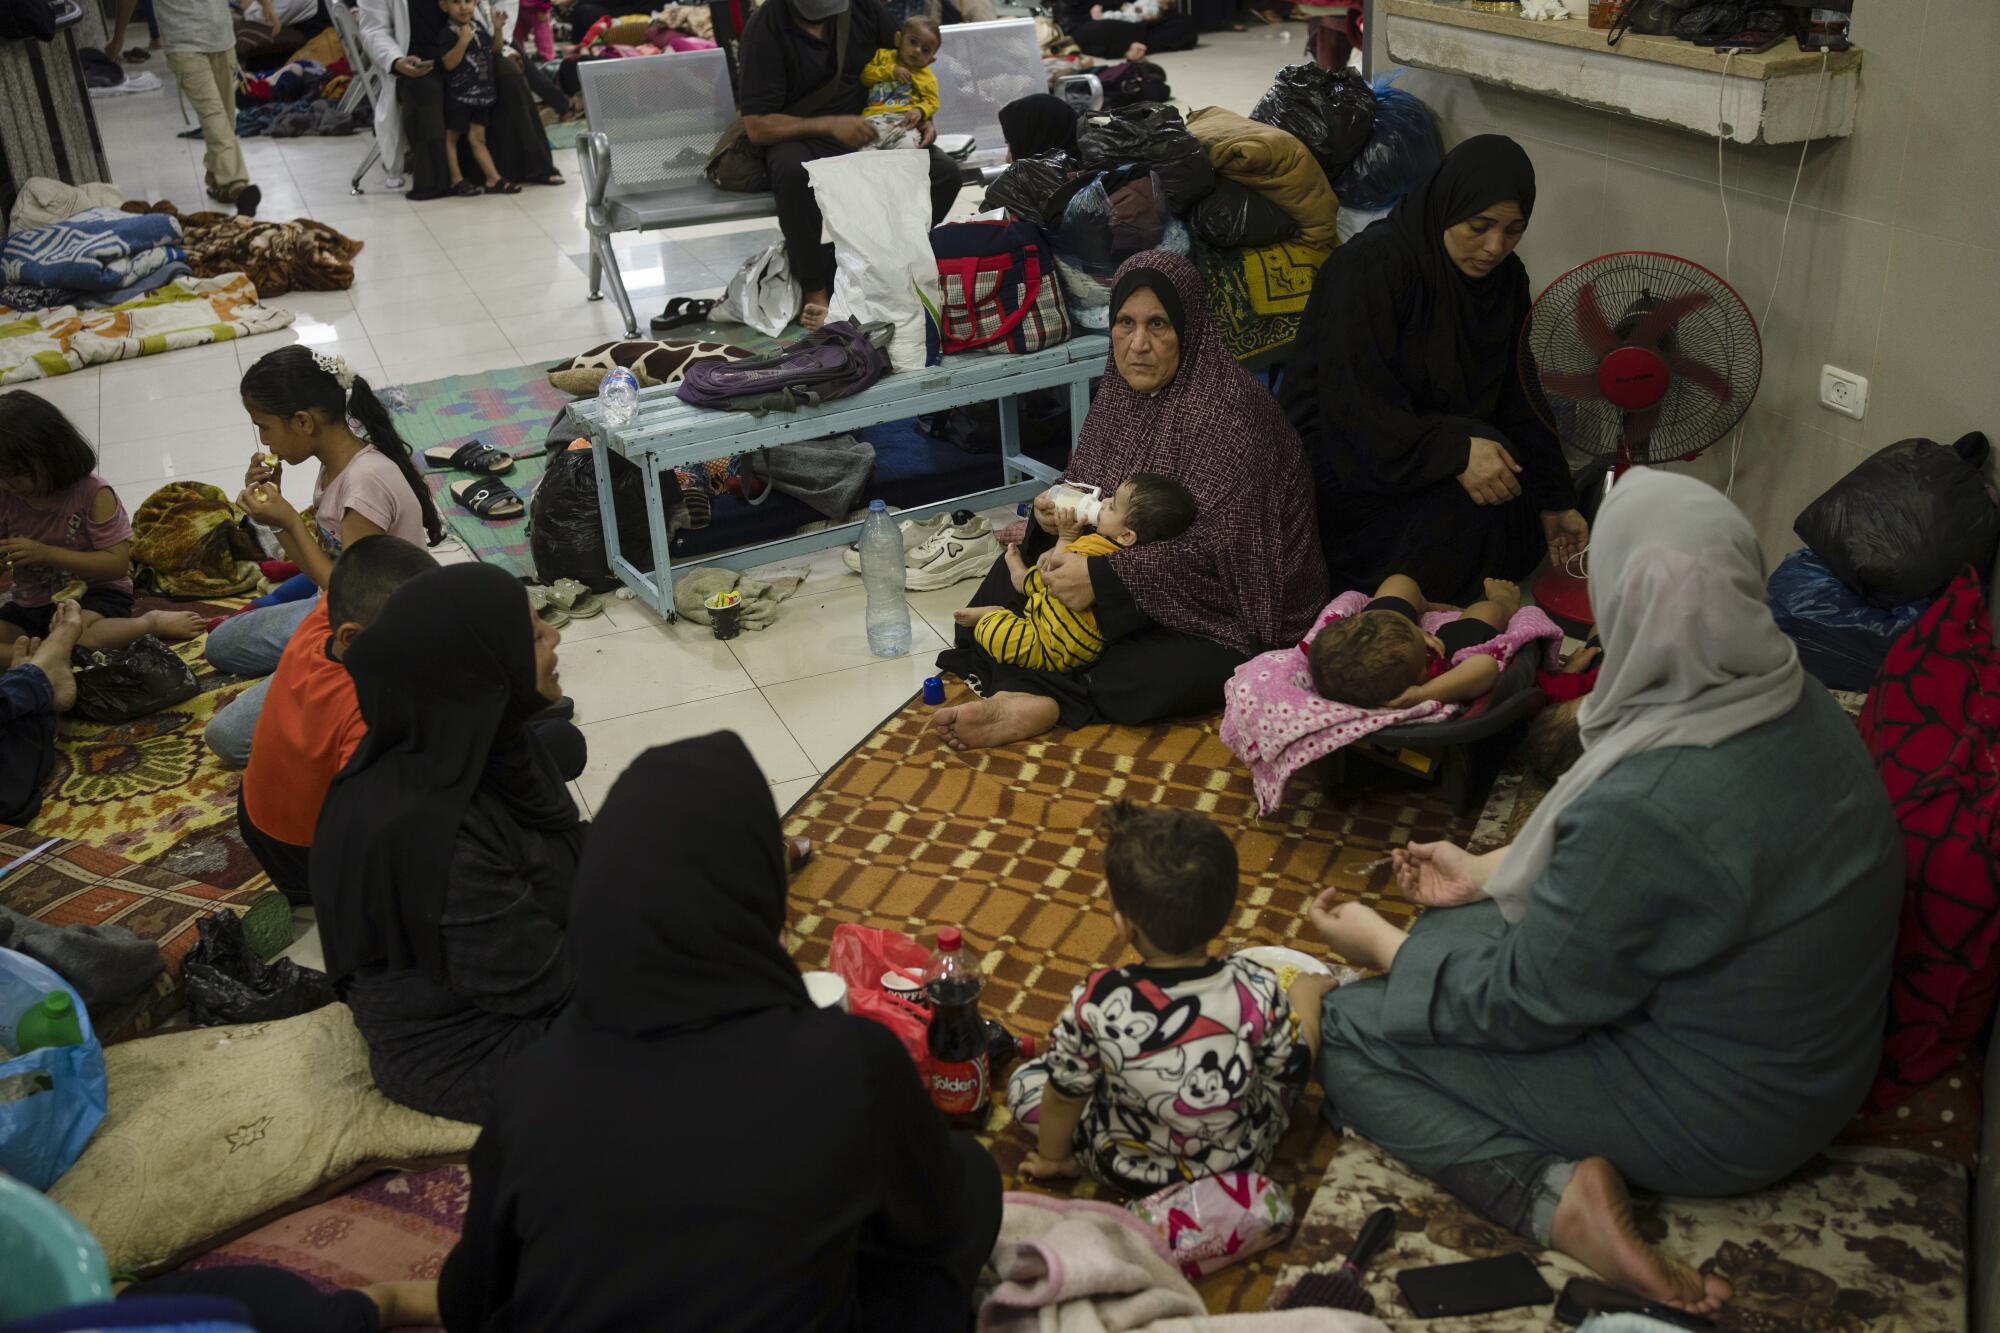 Palestinians sheltering in a hospital during Israeli bombardment of Gaza